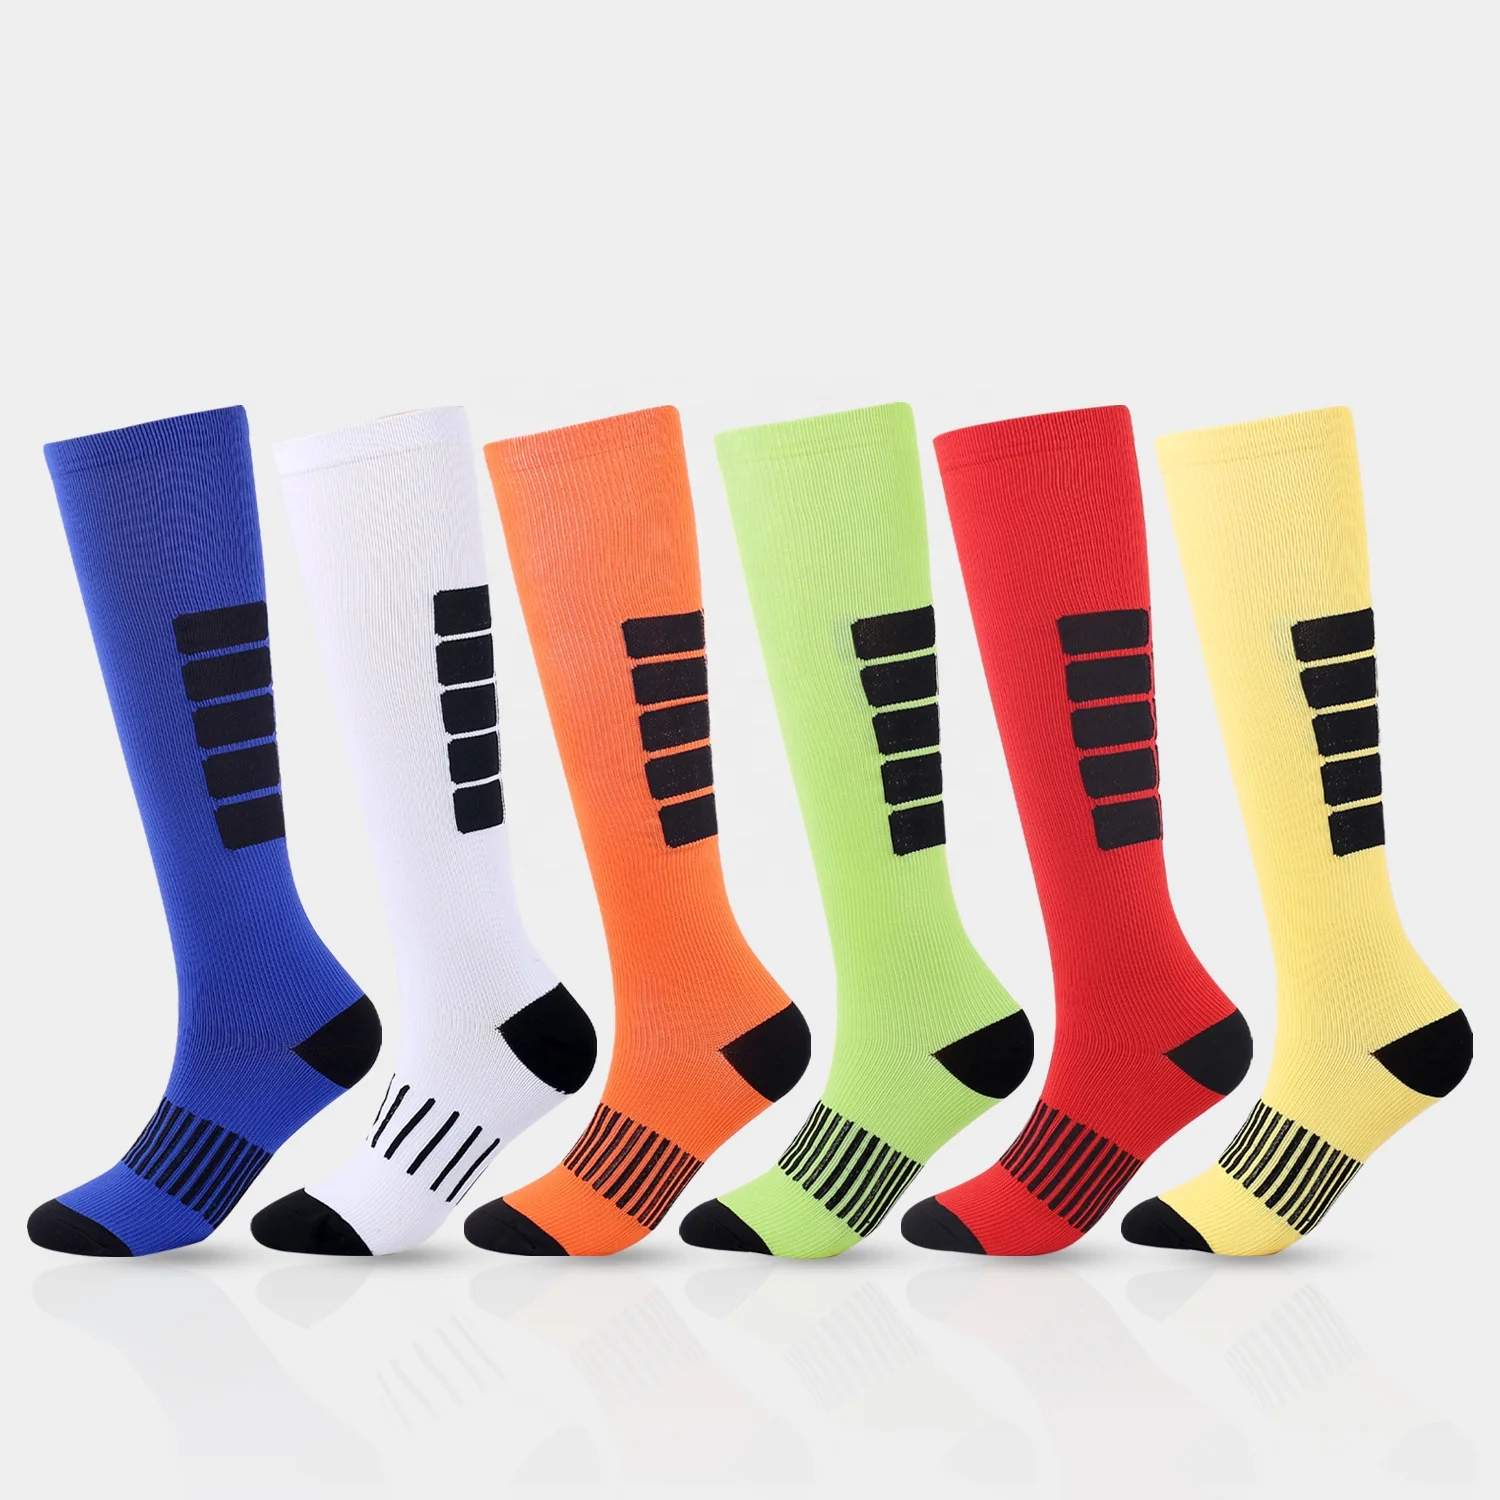 

Wholesale Black Stripe Print Thigh High Socks Unisex Outdoor Cycling Athletic Compression socks, 6 colors